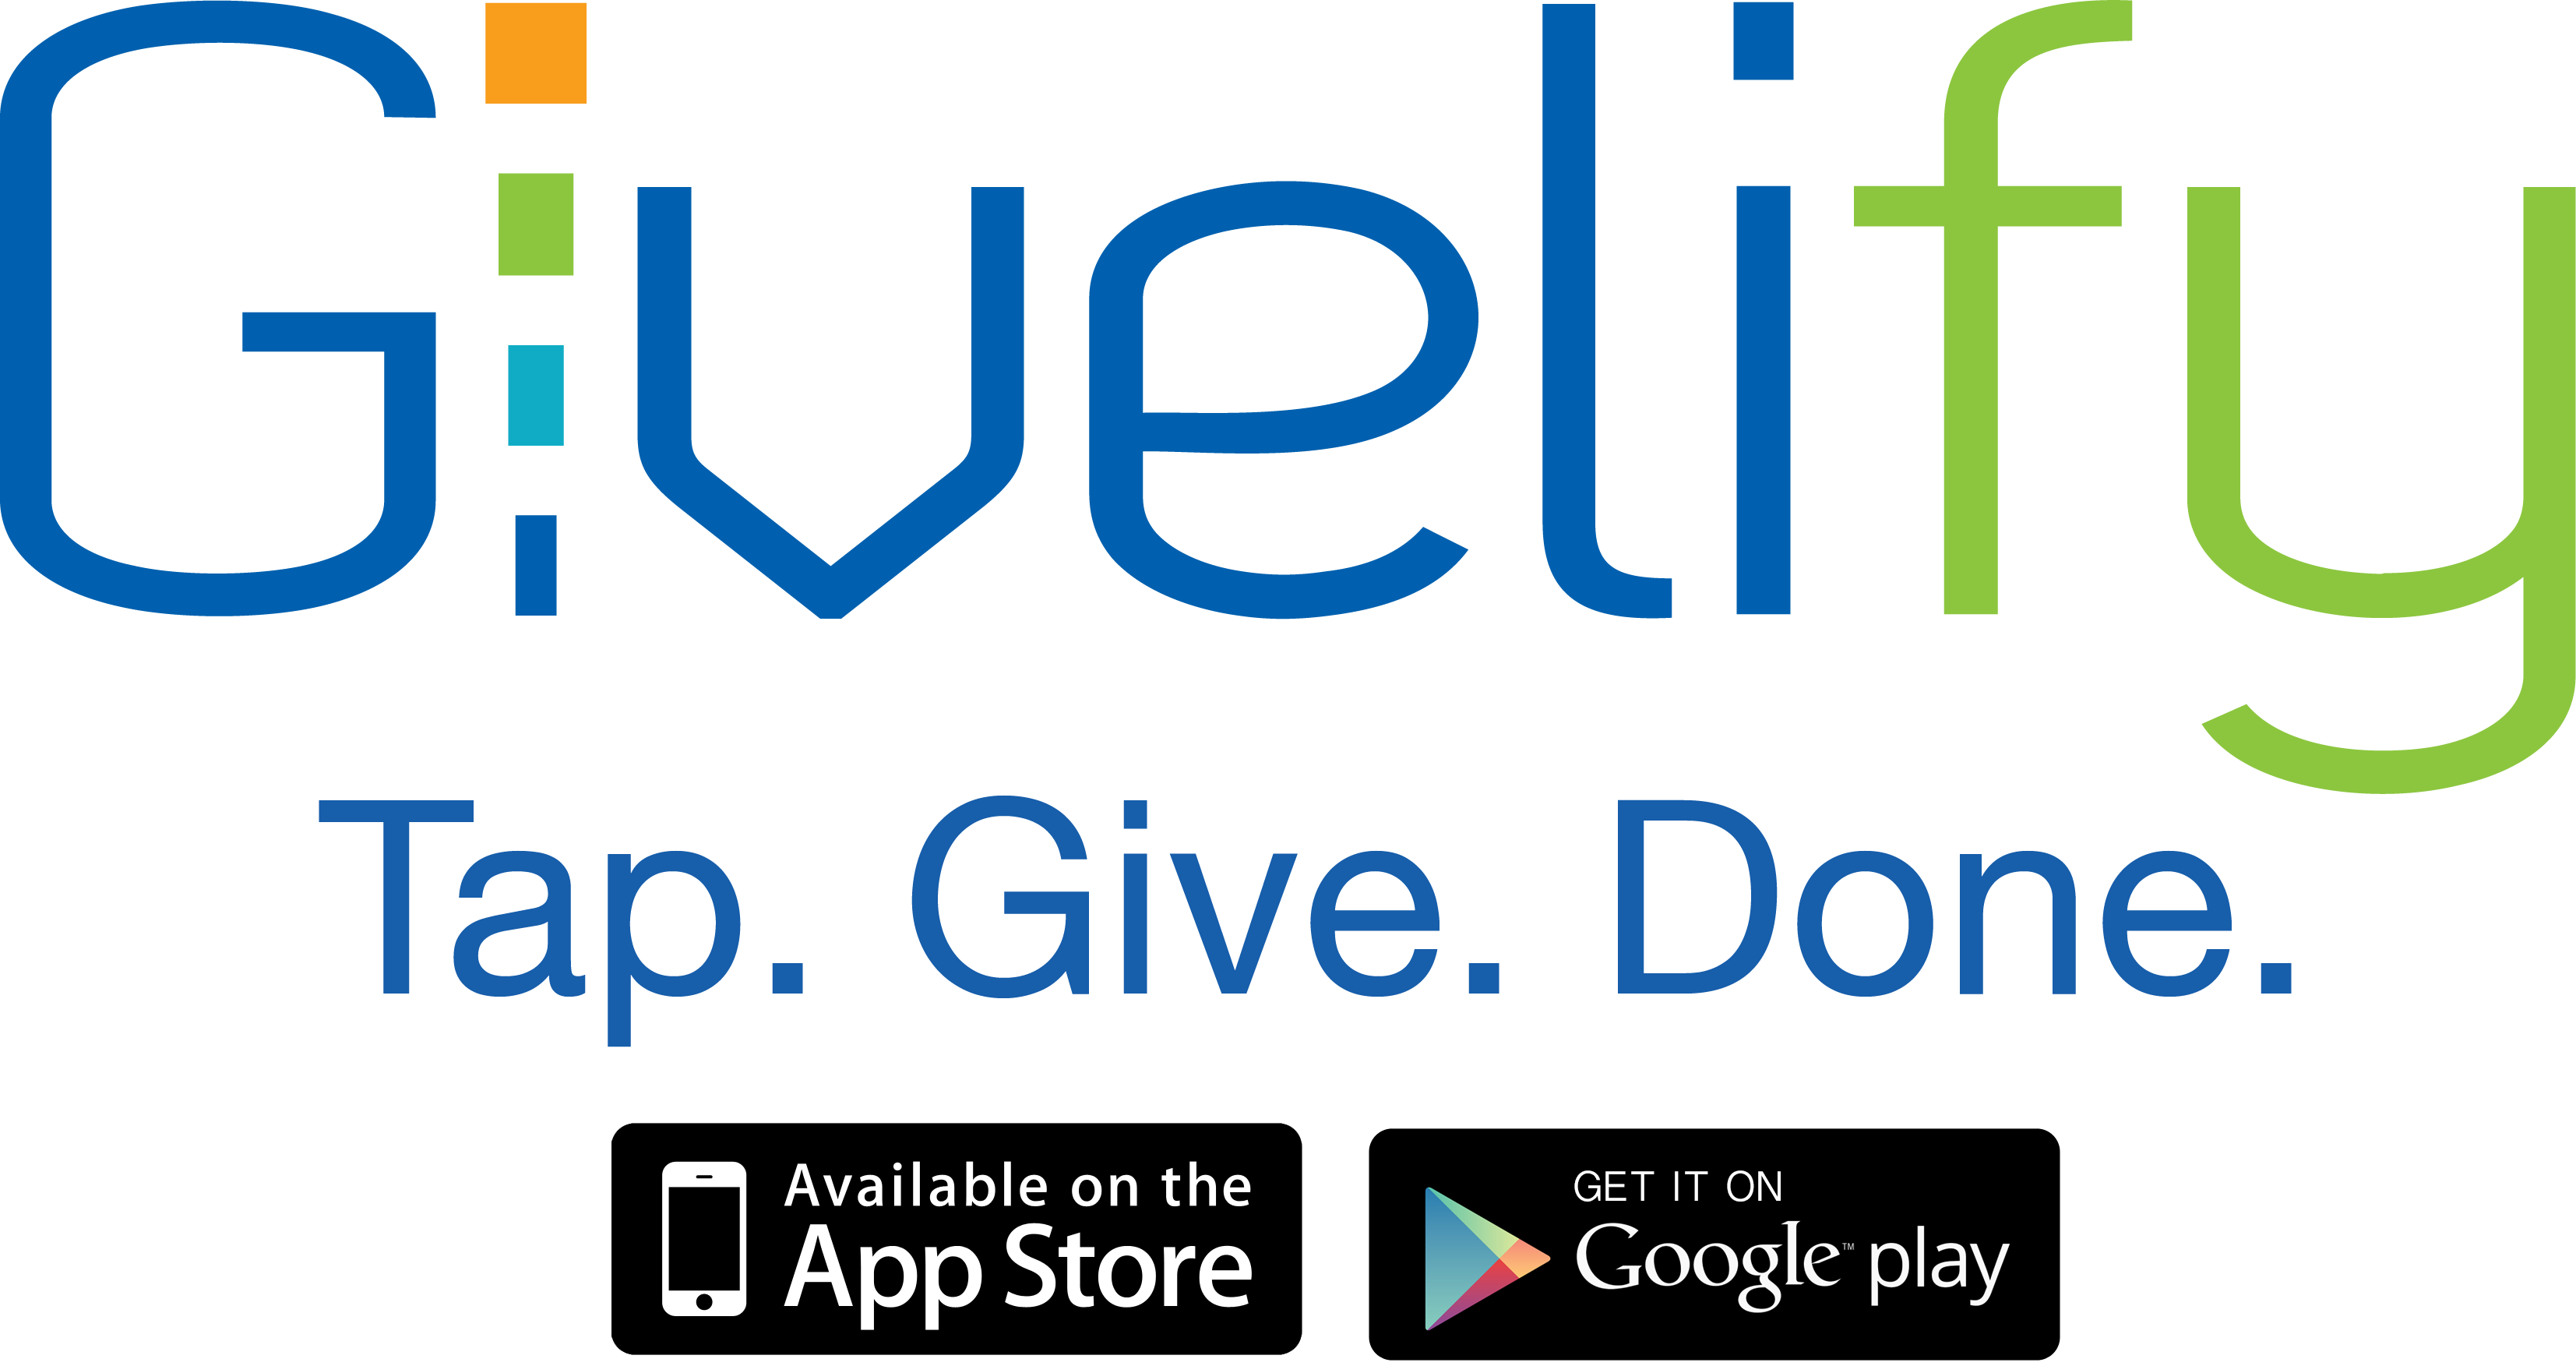 image-728524-givelify-logo-300dpi-with-app-buttons.png